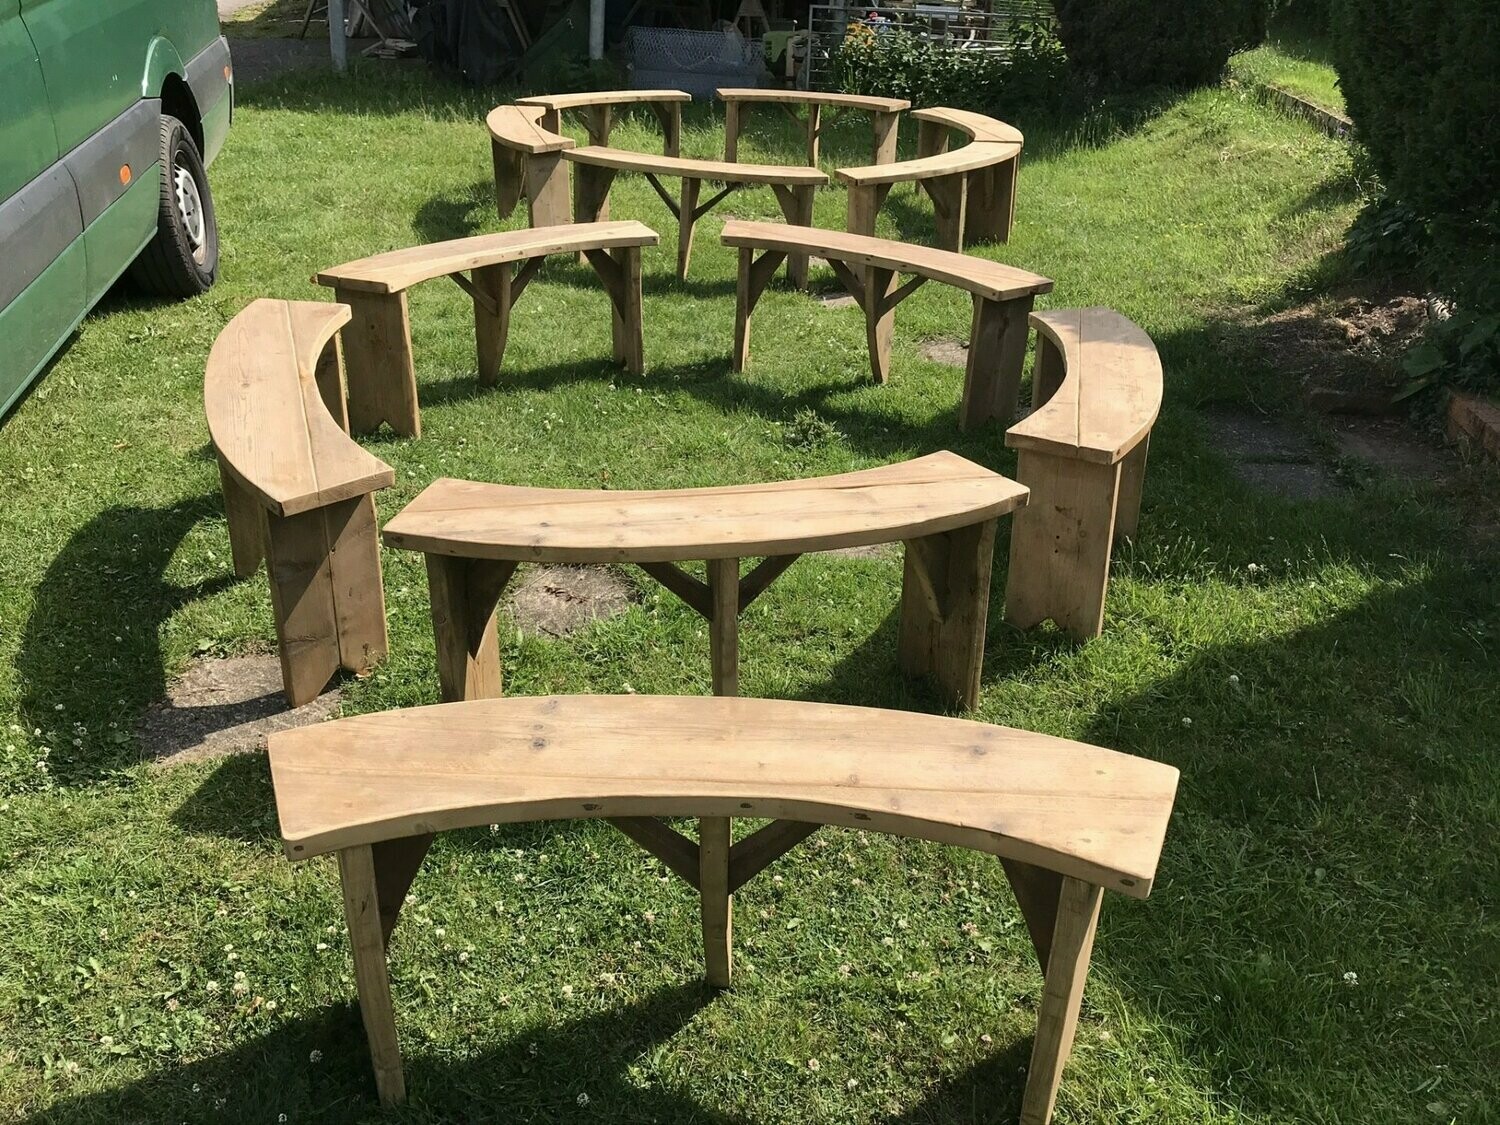 2 x 4ft Curved Bench hand made reclaimed timber Garden Fire Pit Meeting Room School Club Bench. Fire pit bench Curved garden bench Garden Seating. Environmentally friendly.